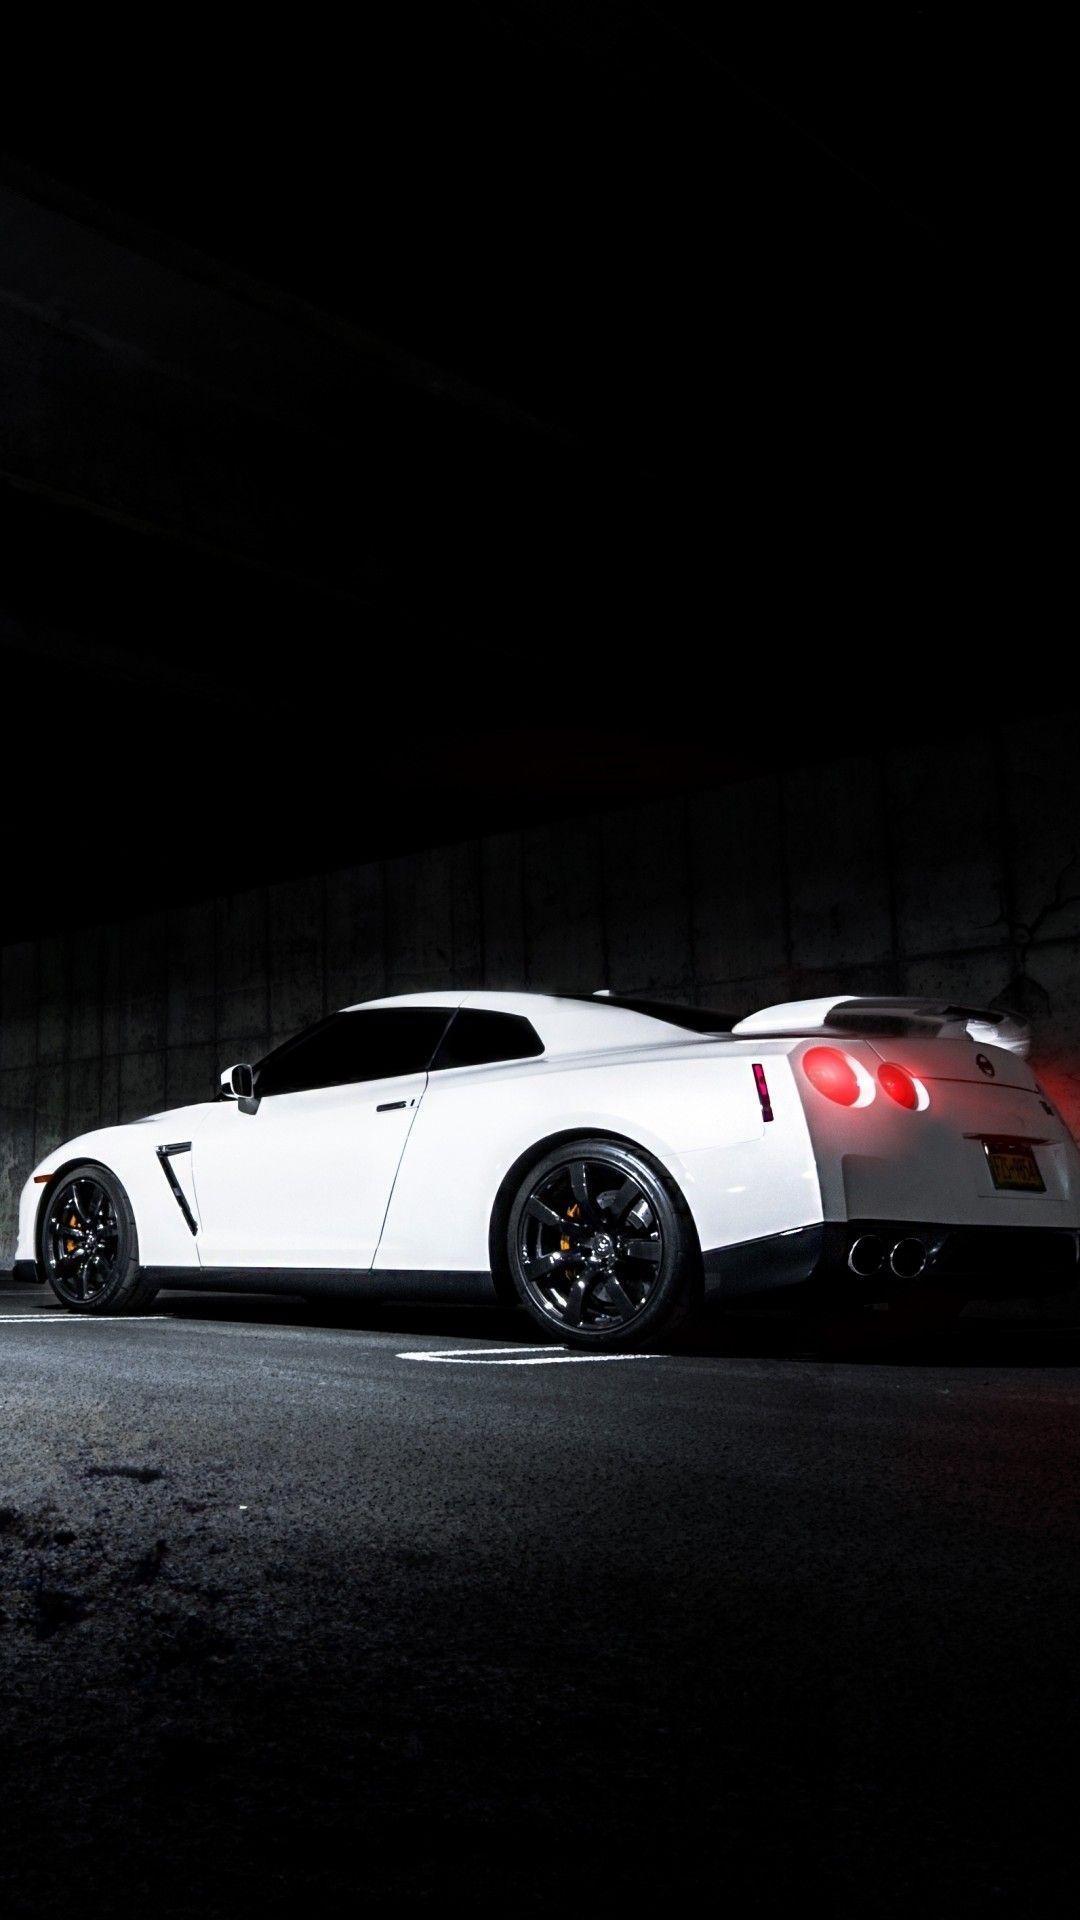 Nissan GTR R35 red car front view 750x1334 iPhone 8766S wallpaper  background picture image